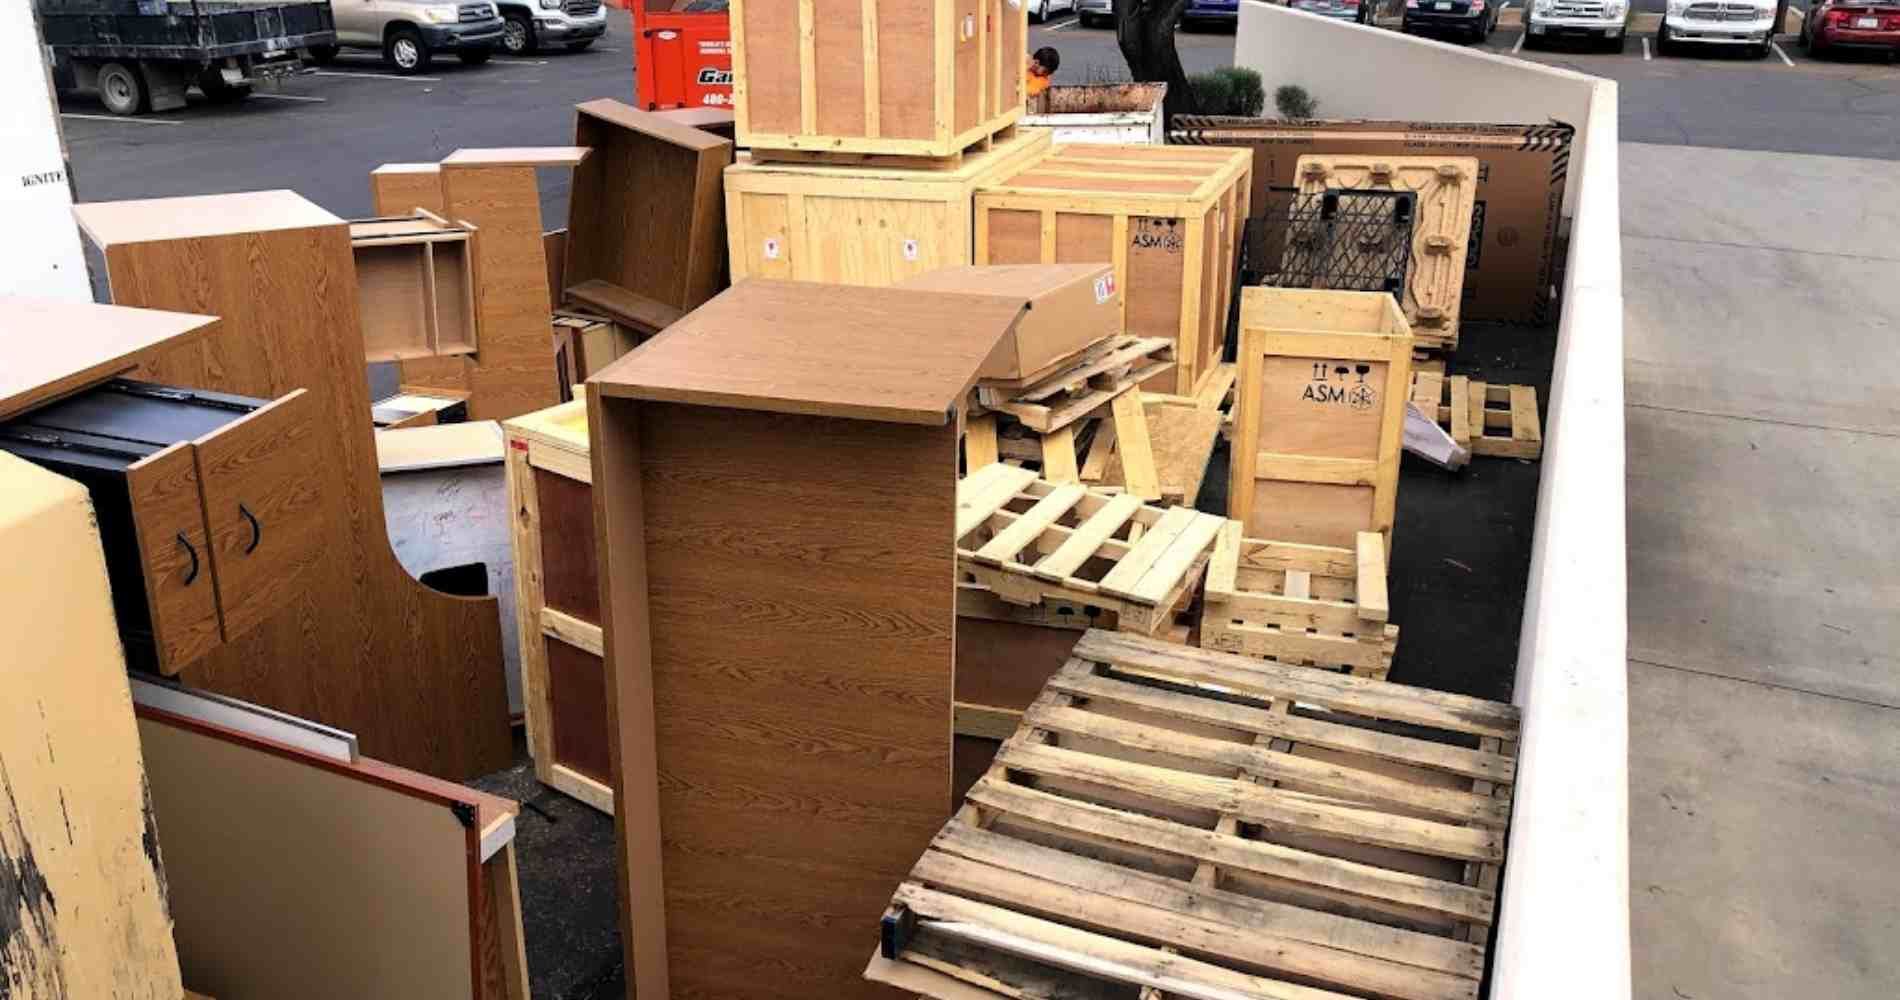 #1 for Pallet Disposal in Scottsdale, AZ With Over 1200 5-Star Reviews!